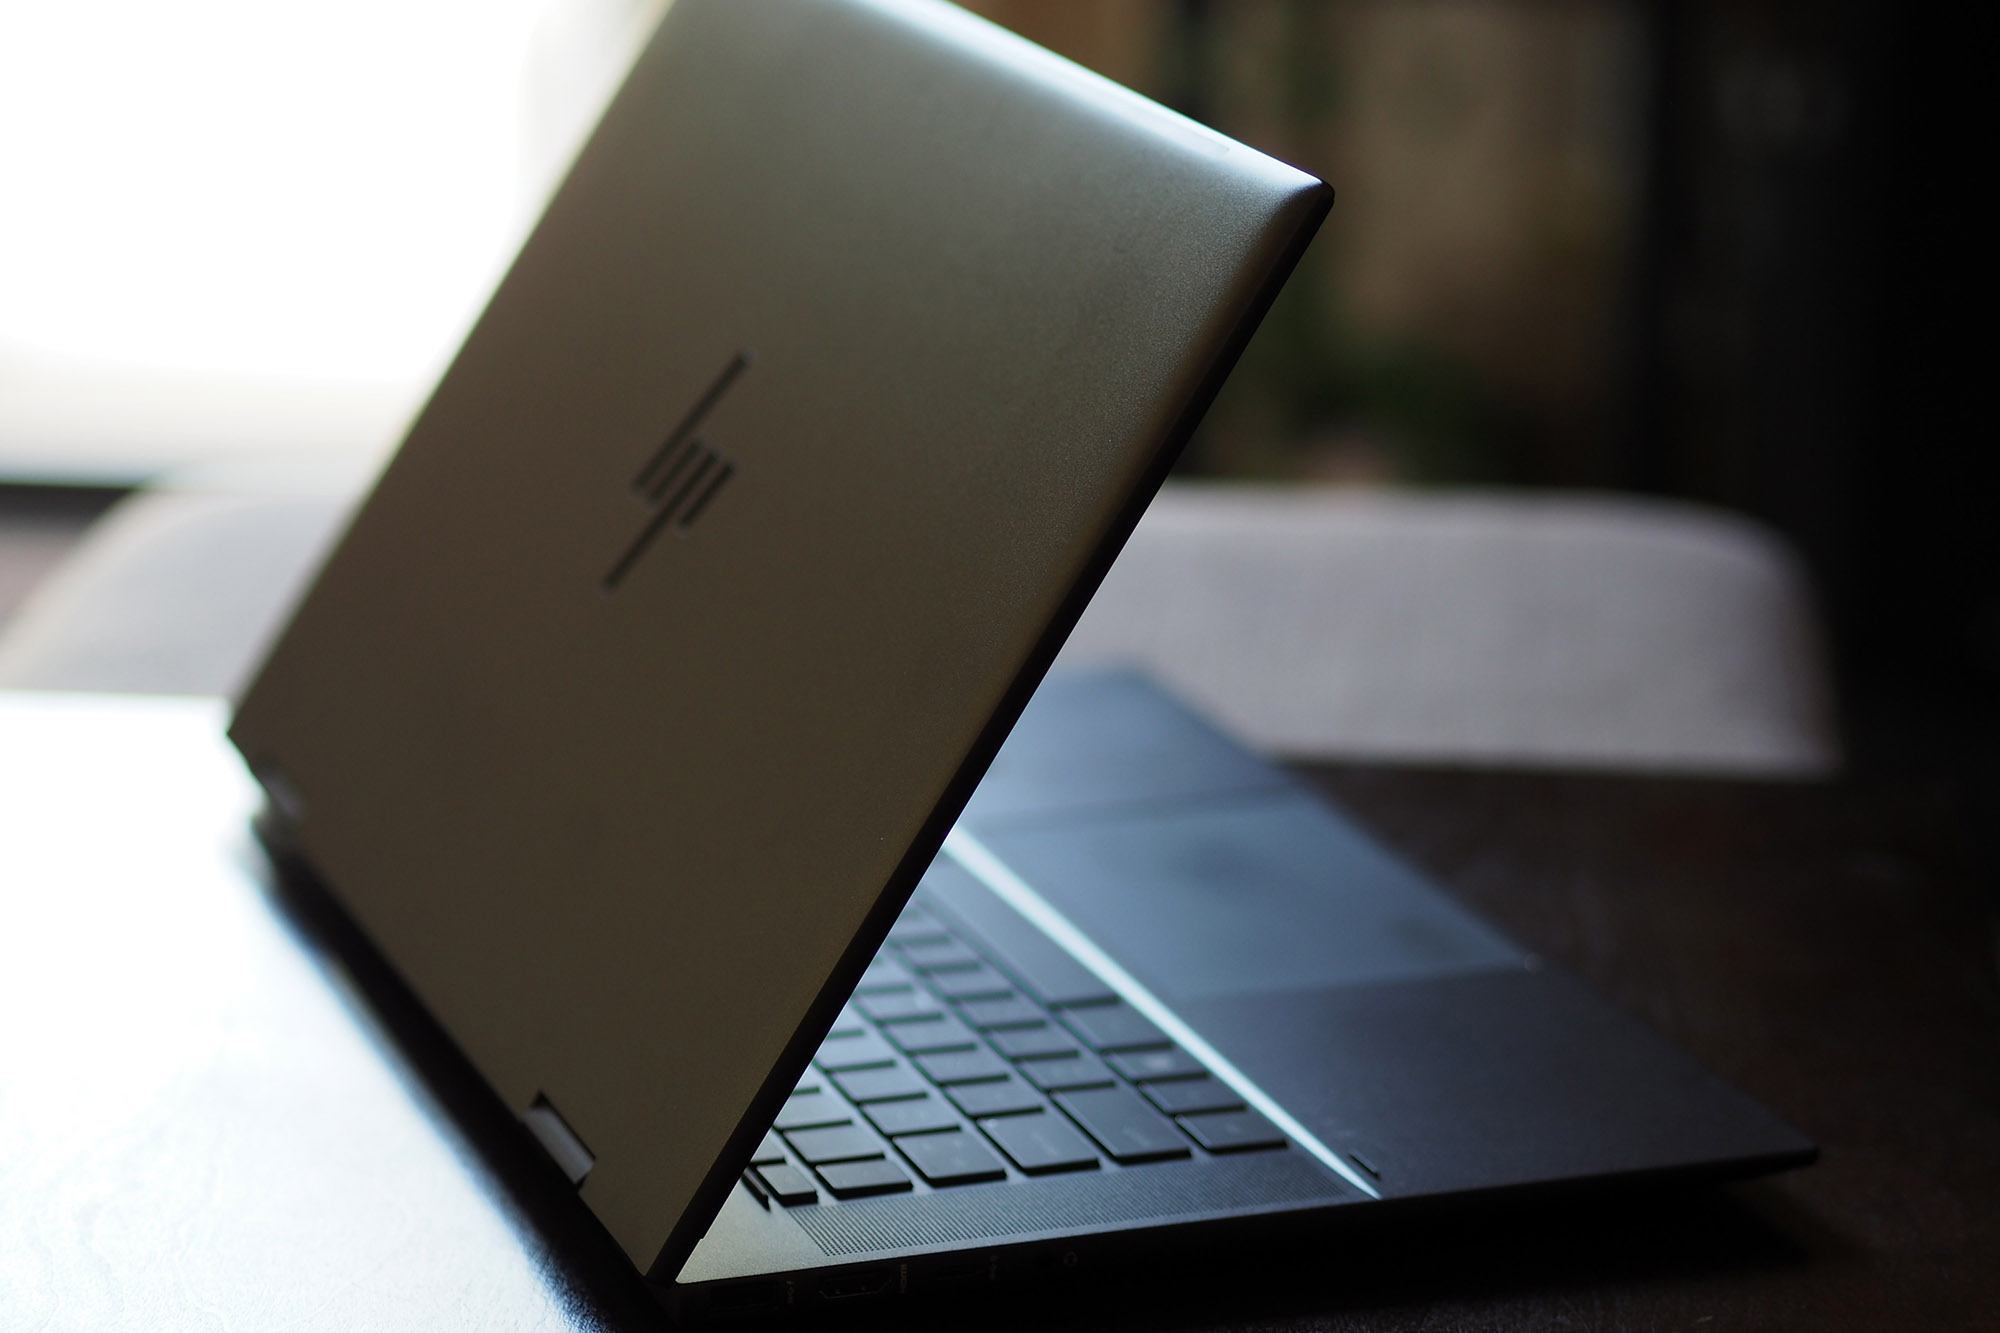 HP Envy x360 15 AMD Review: A Great 2-in-1 with Poor Colors